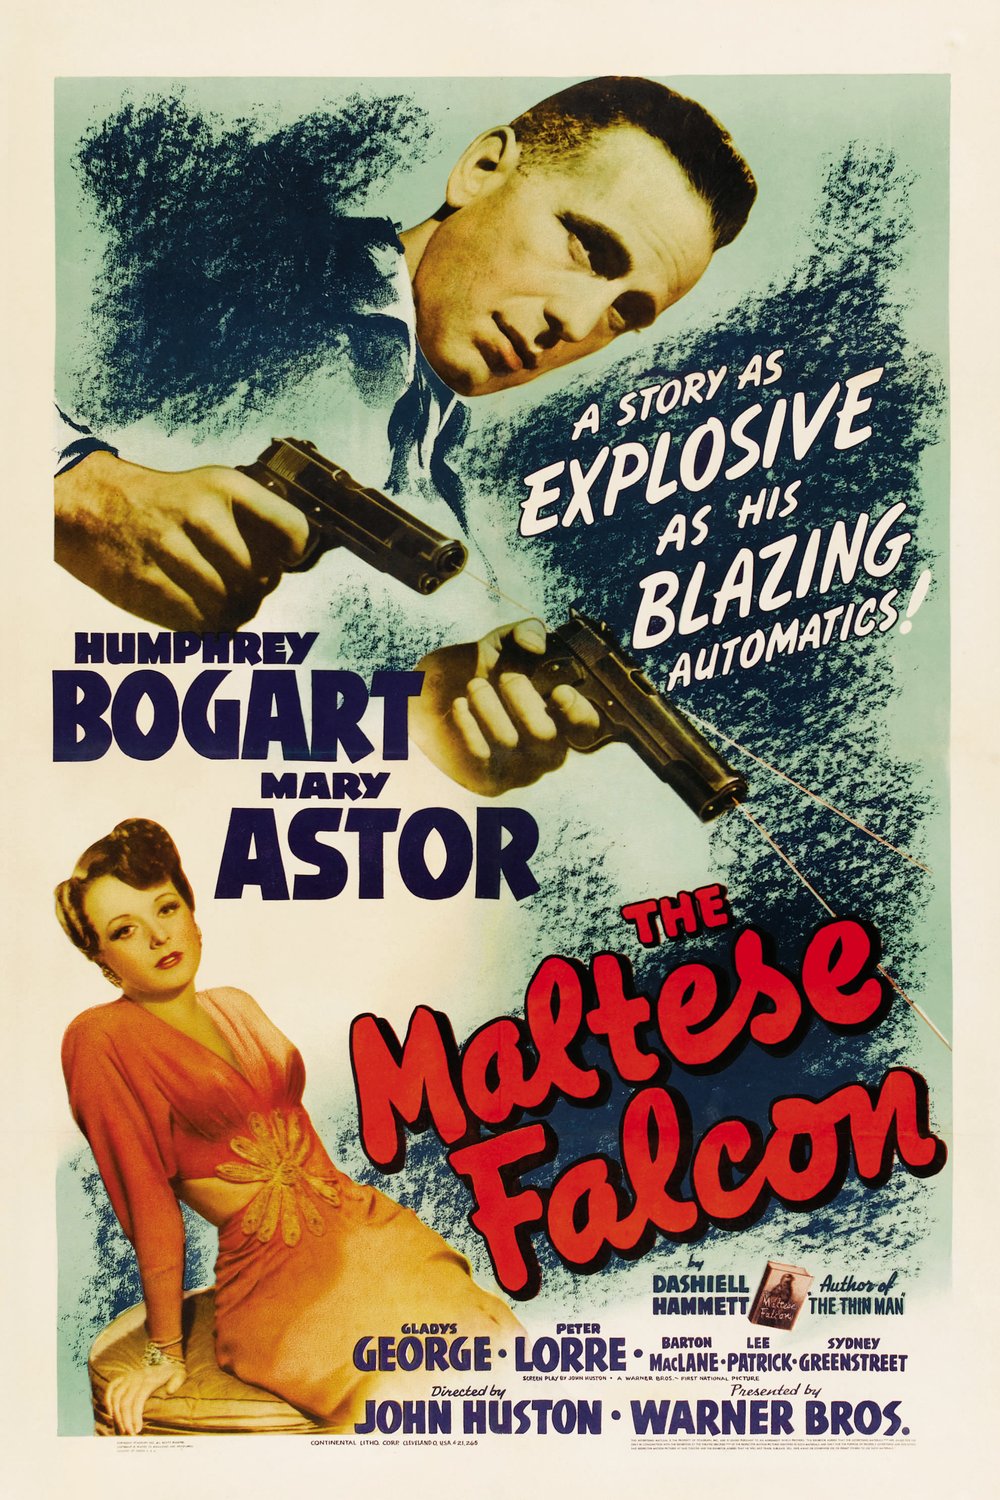 Poster of the movie The Maltese Falcon